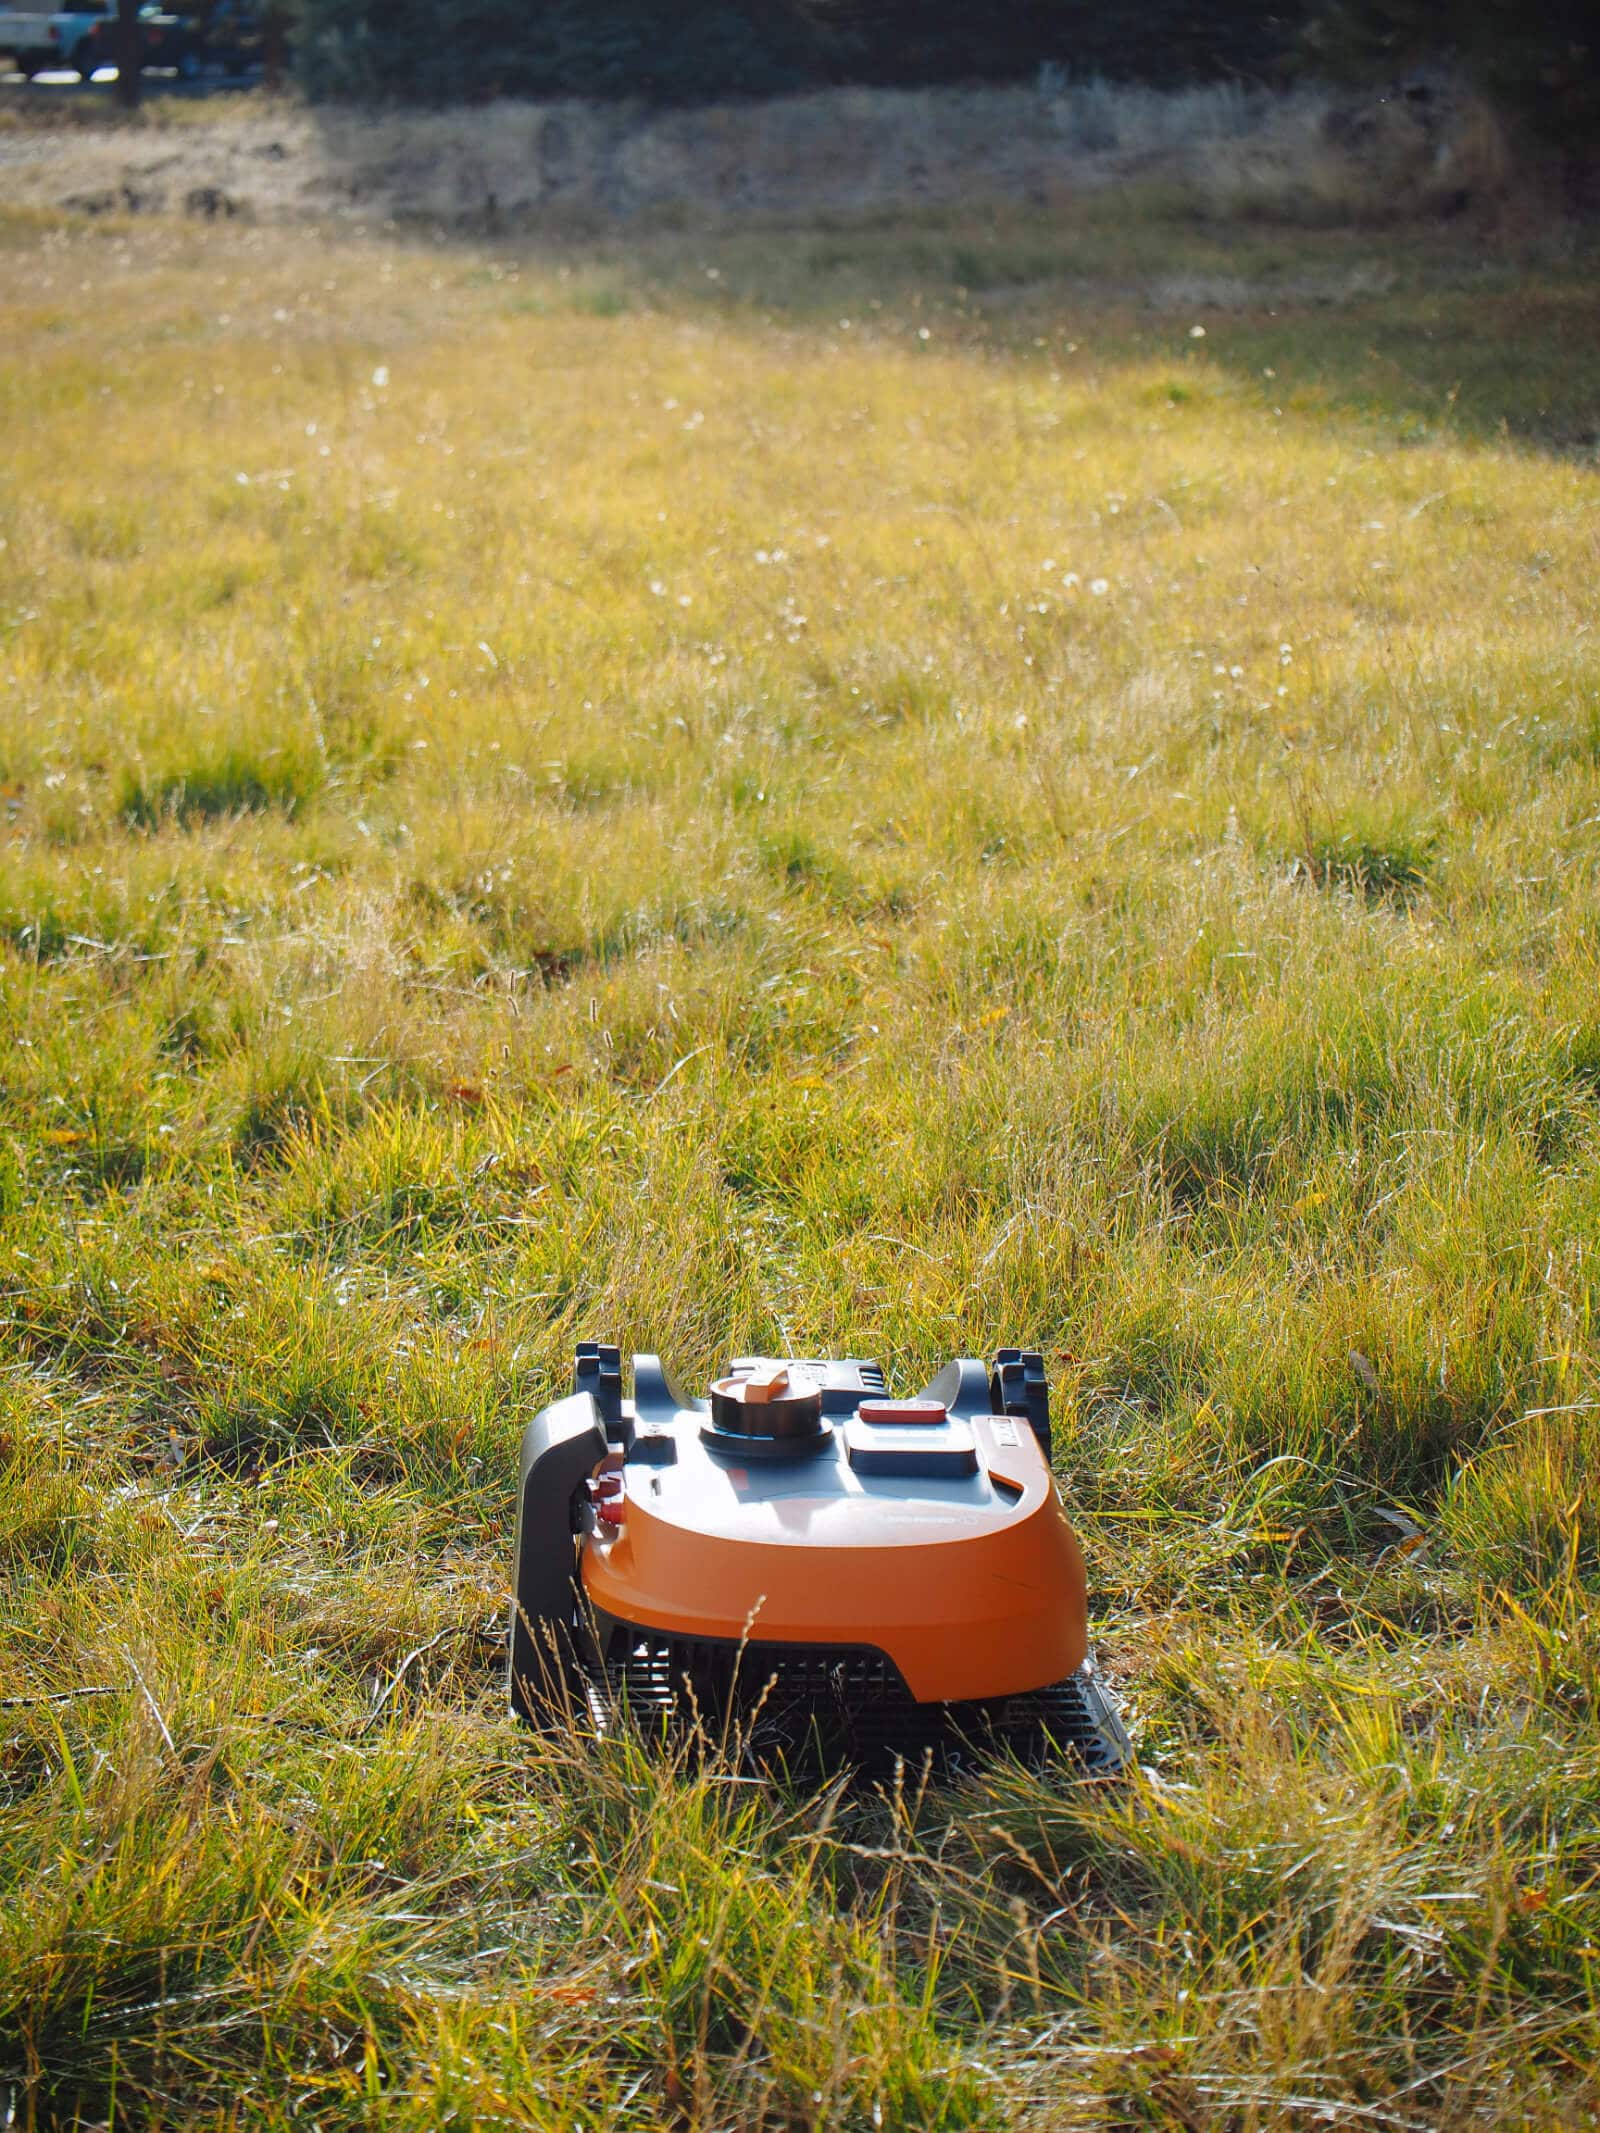 Fall garden cleanup: a robot is mowing my lawn